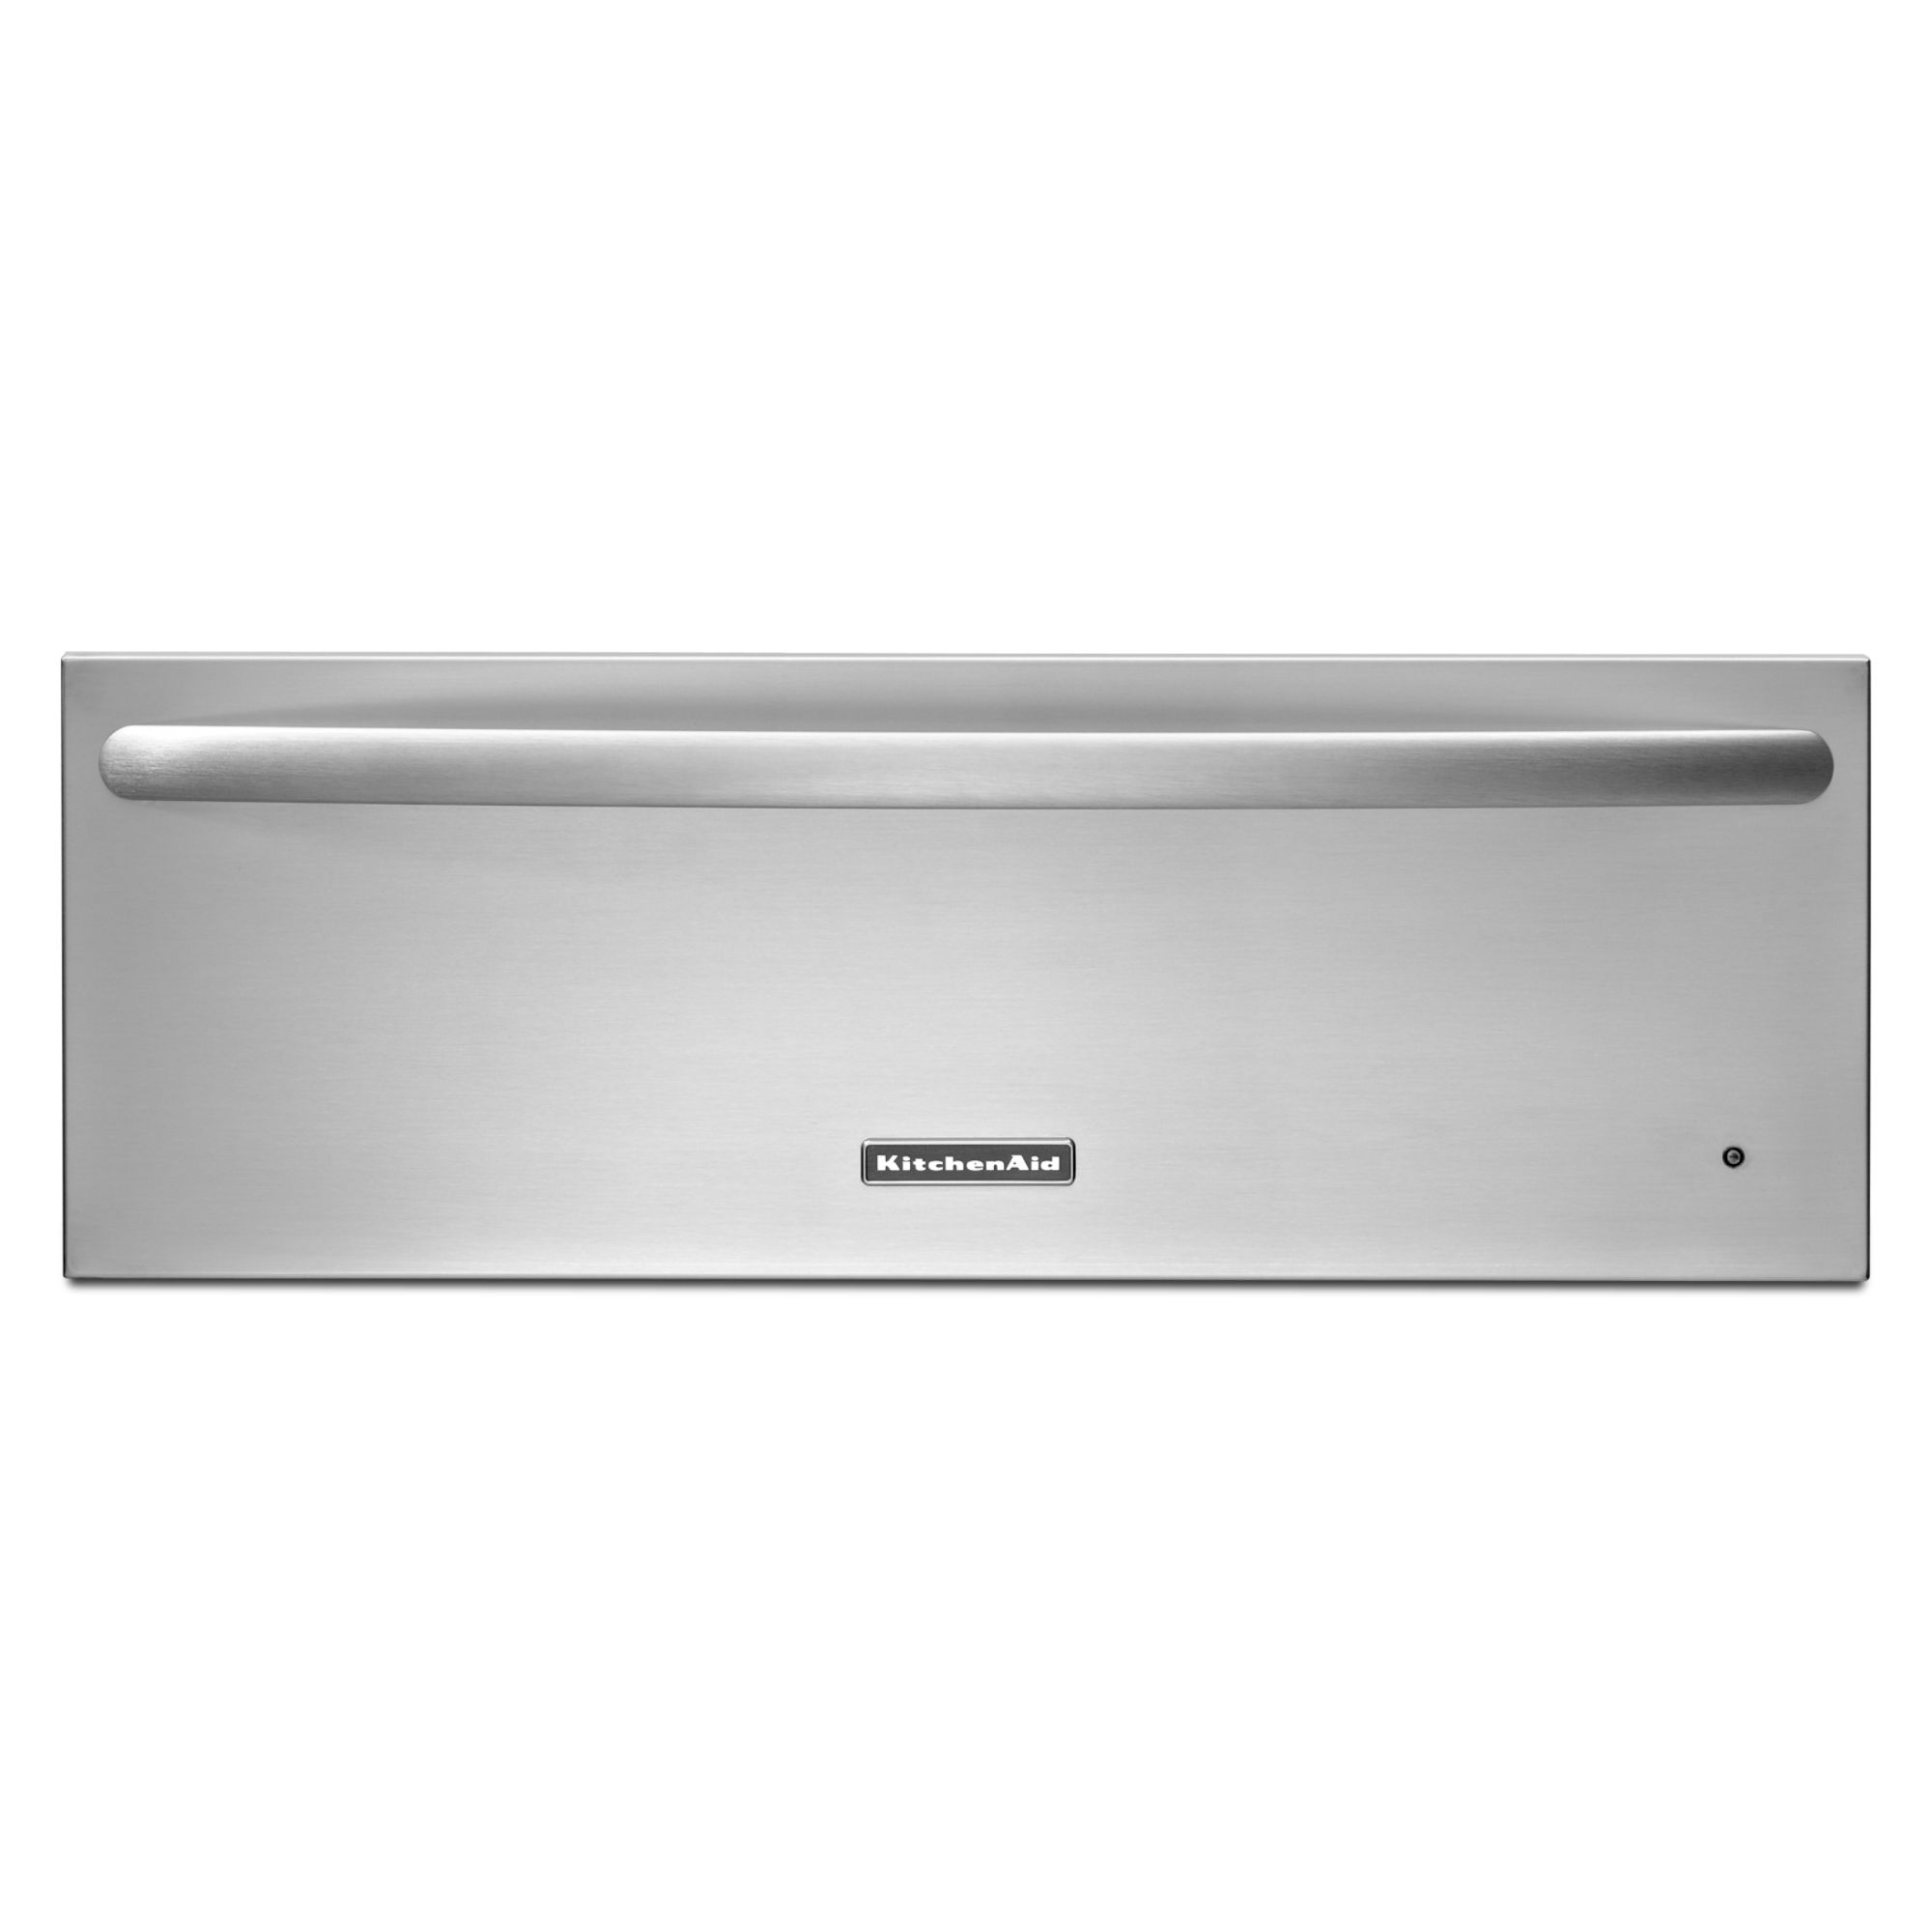 KitchenAid 30 Slow Cook Warming Drawer Architect Series II - Stainless Steel 2 position